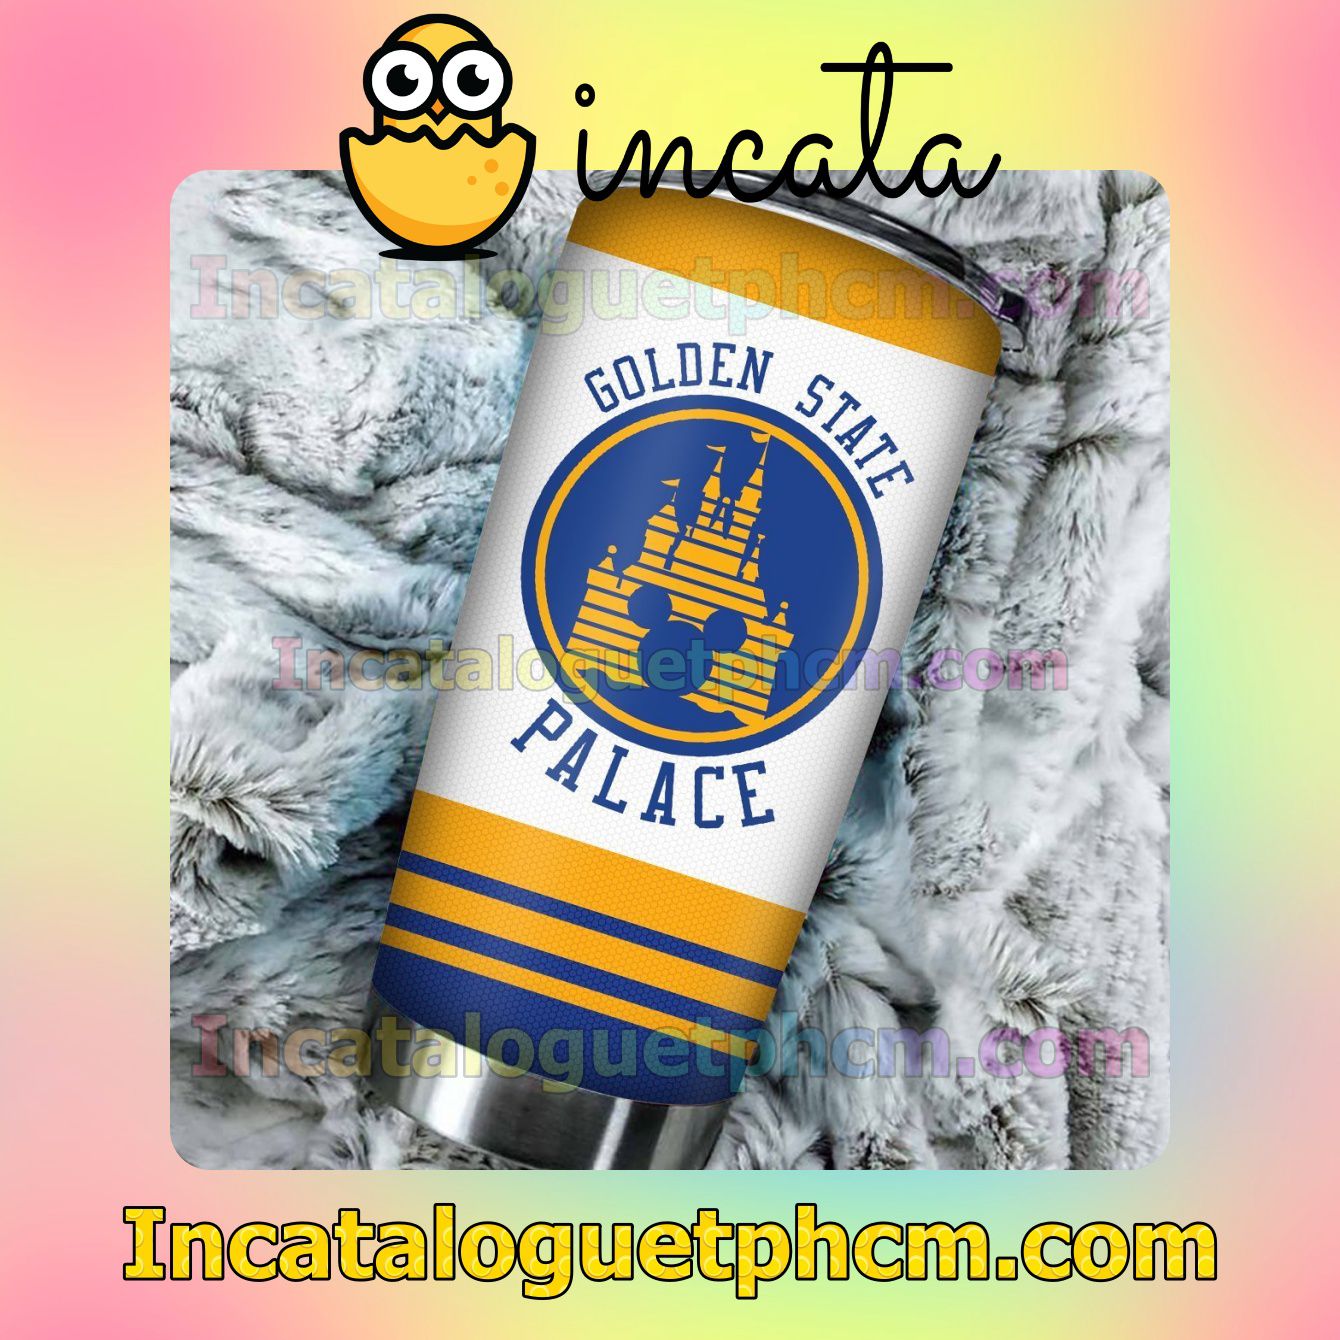 Popular Personalized Golden State Palace Tumbler Design Gift For Mom Sister